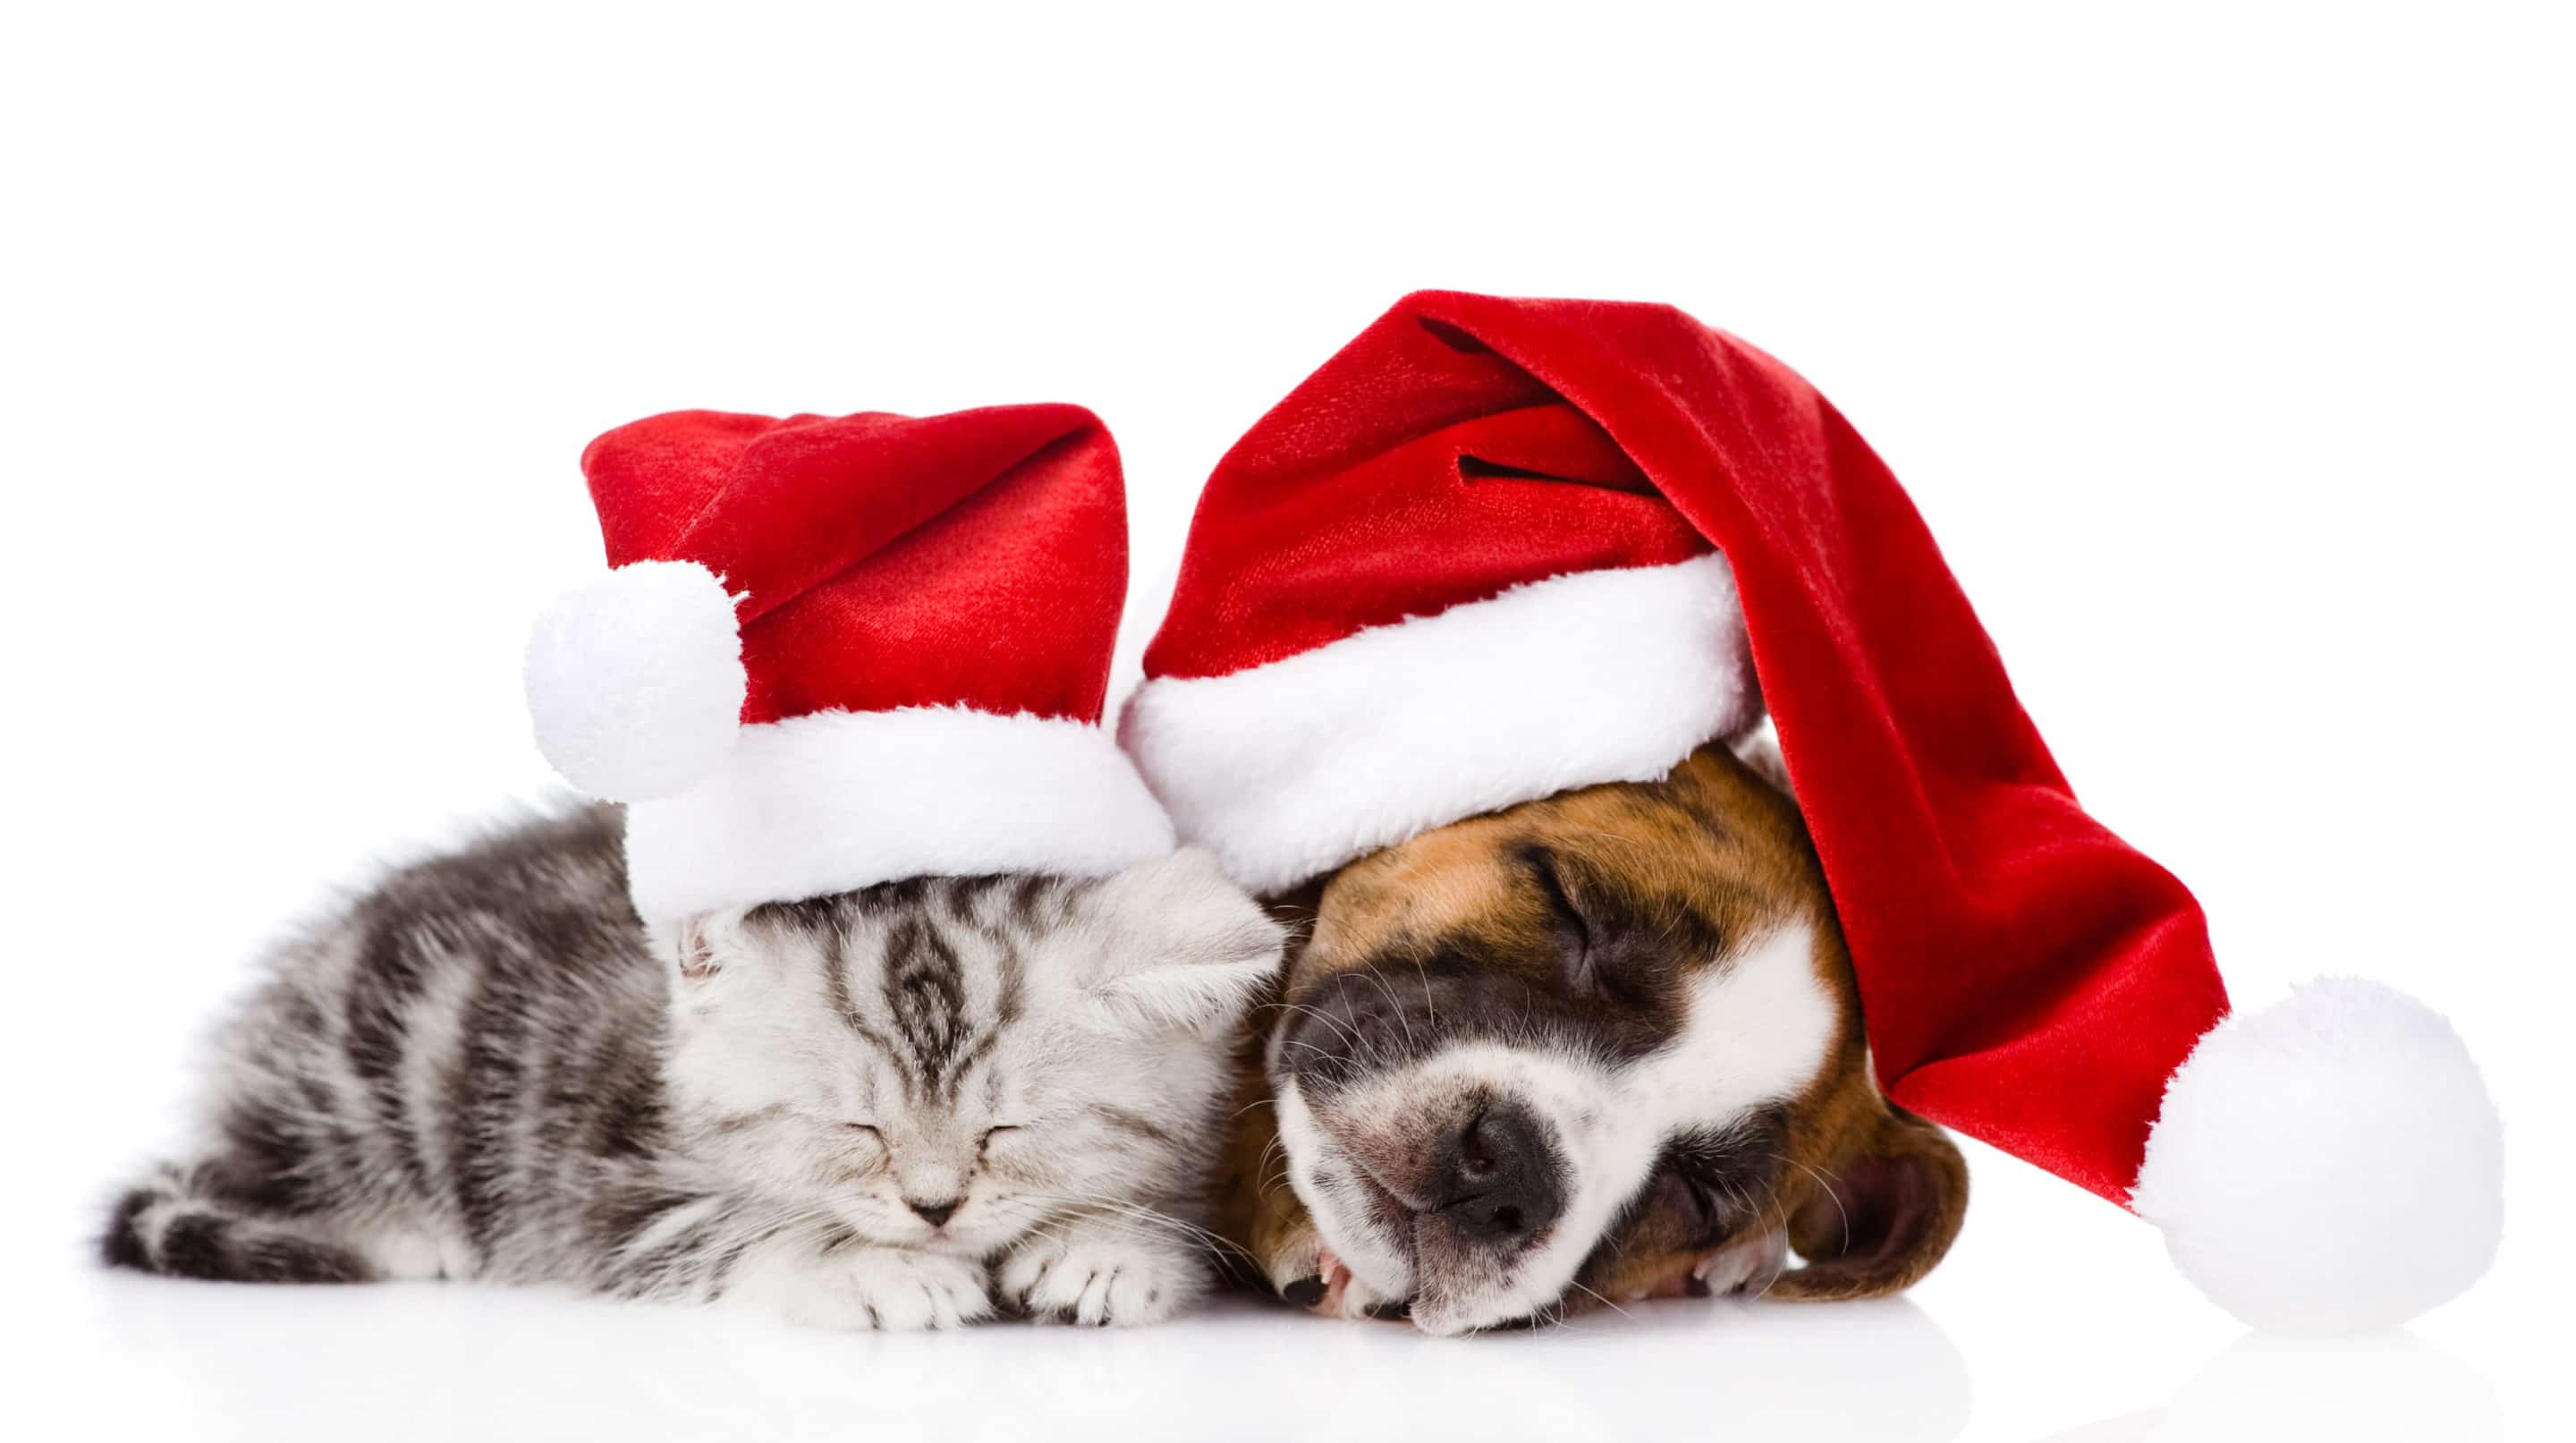 Kitten and puppy with Santa hats on